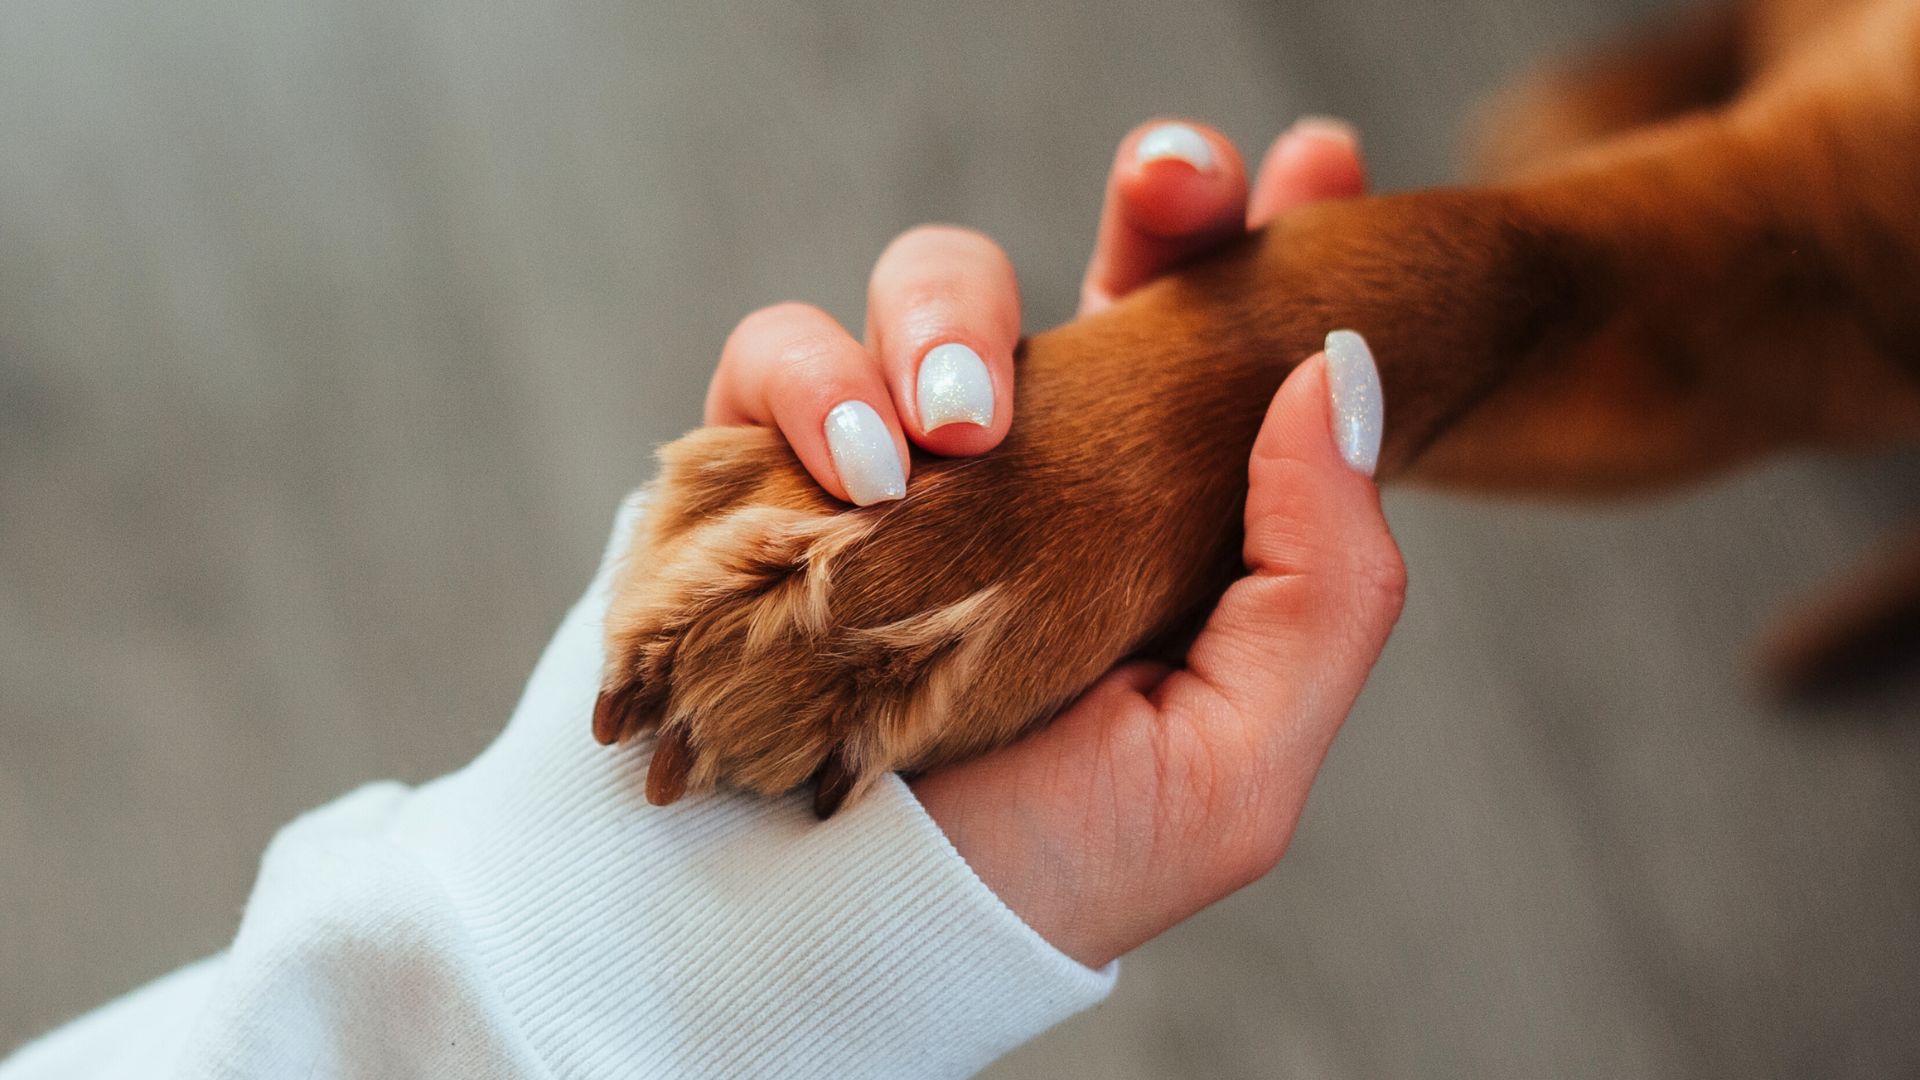 Holding hands with a dog. 